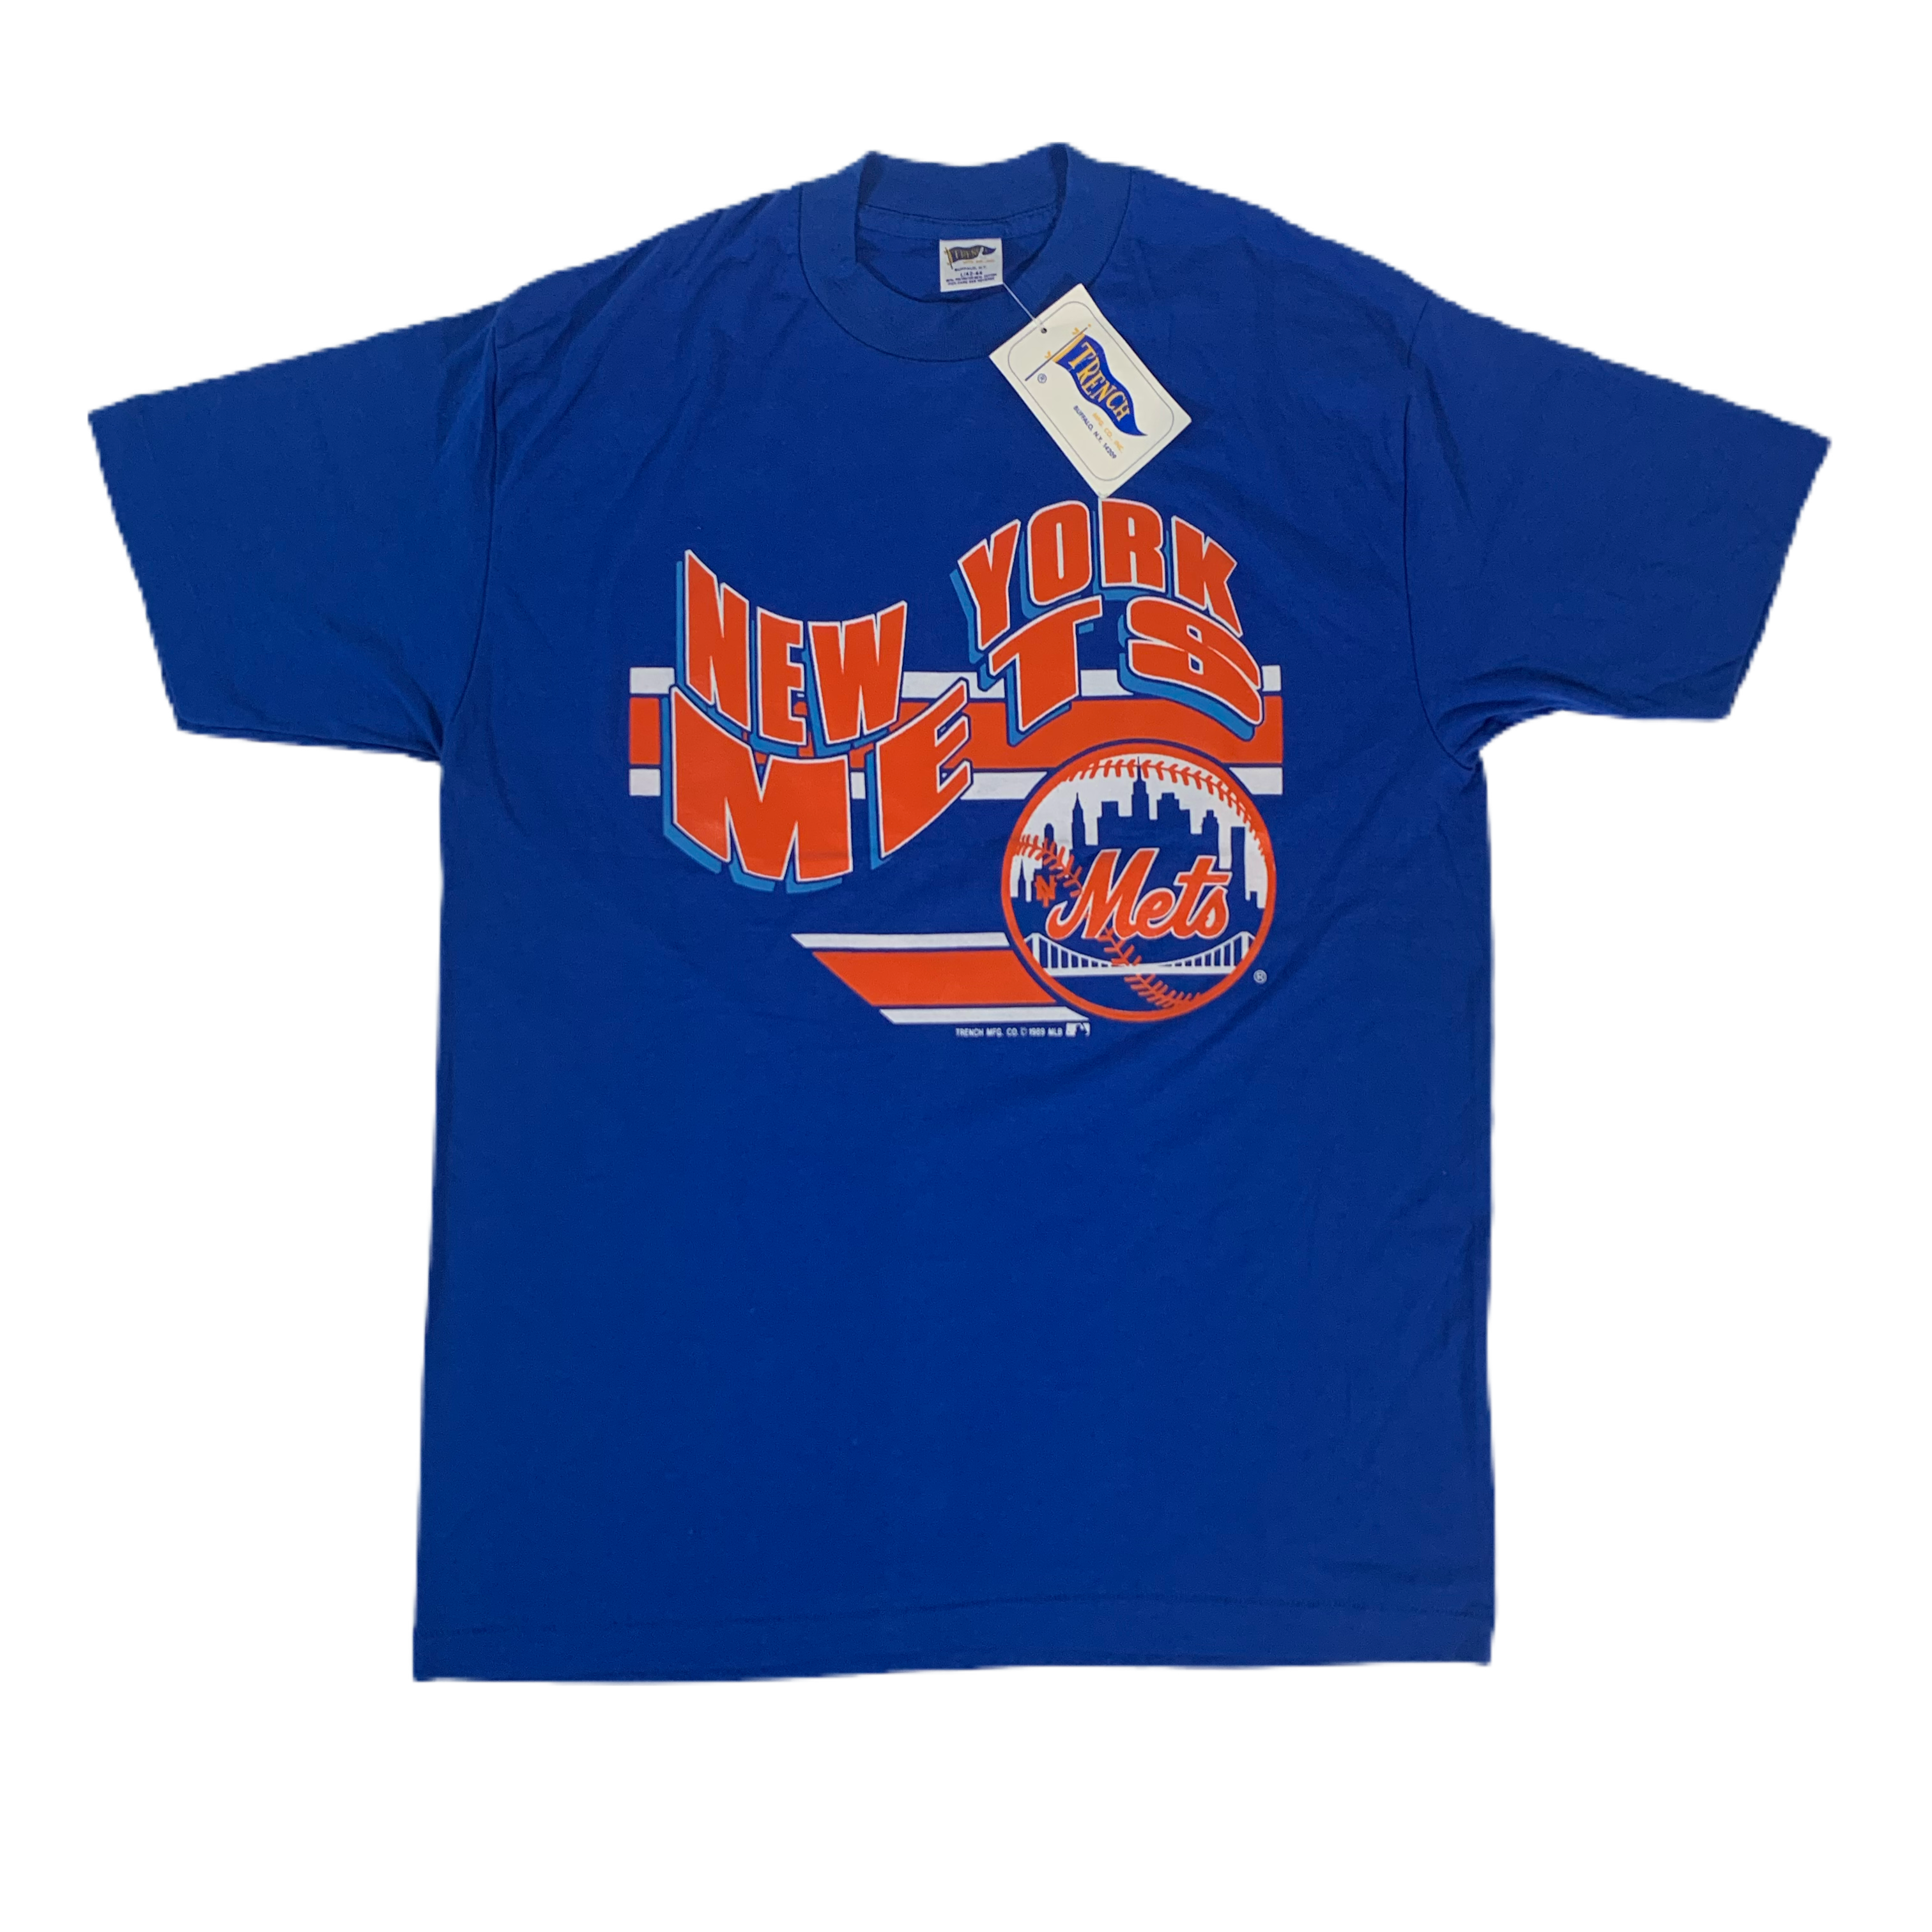 New York Mets Apparel, Mets Jersey, Mets Clothing and Gear